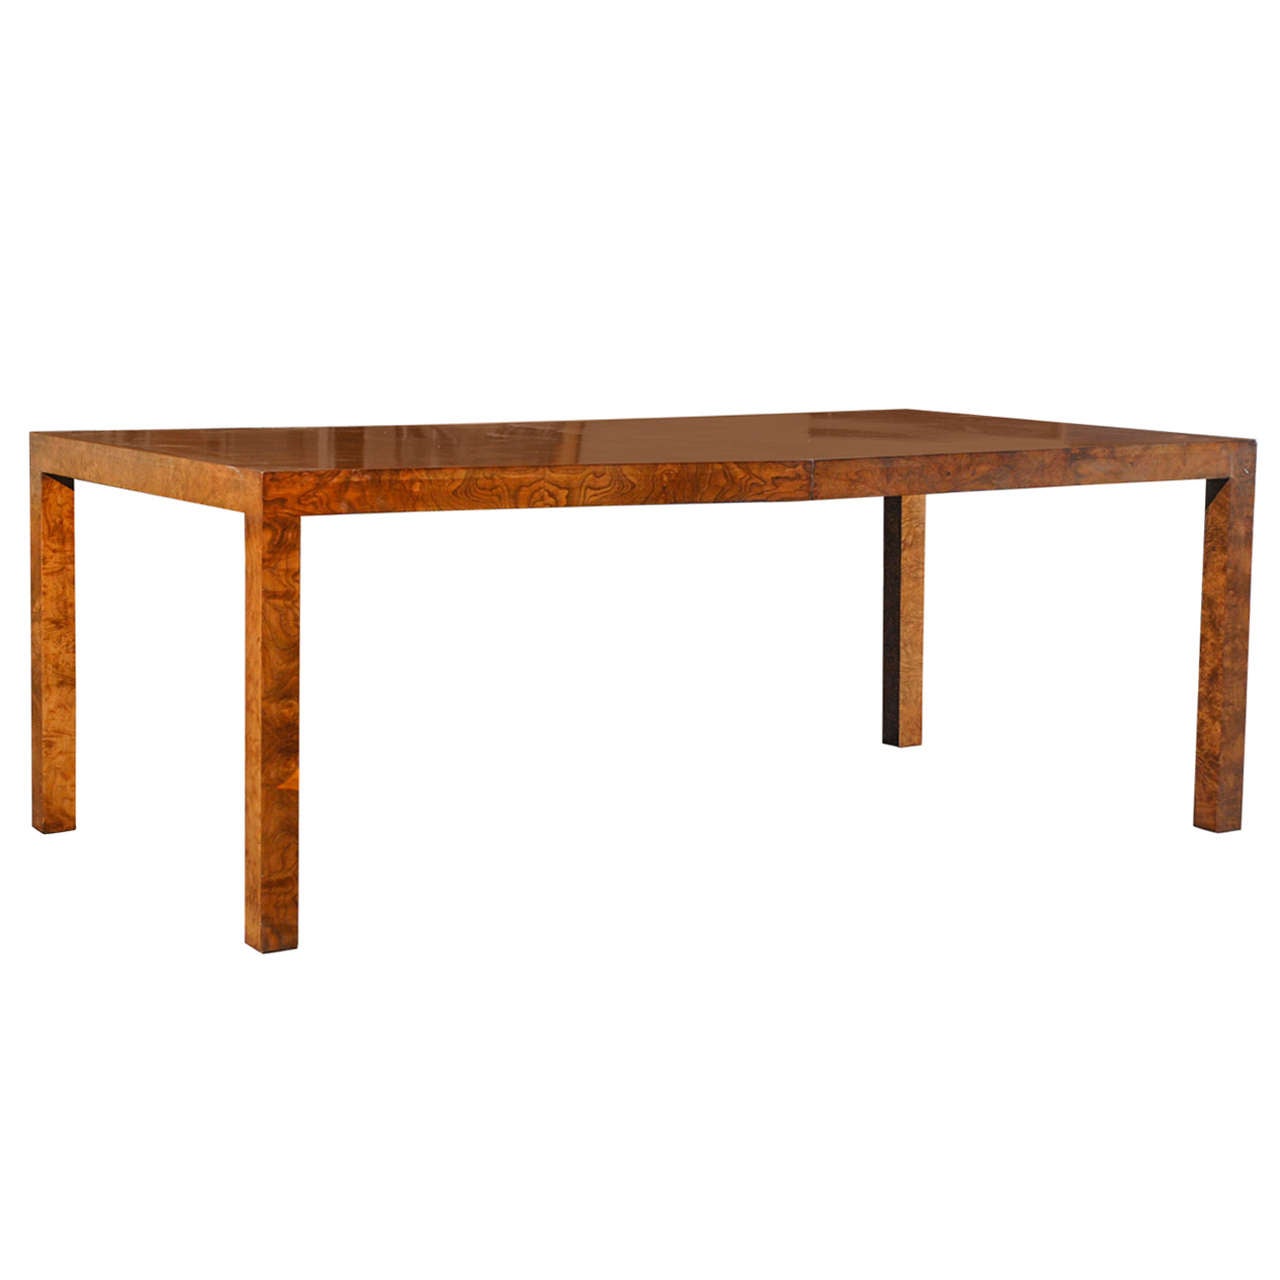 Midcentury Burl Wood Dining Table with Leaf